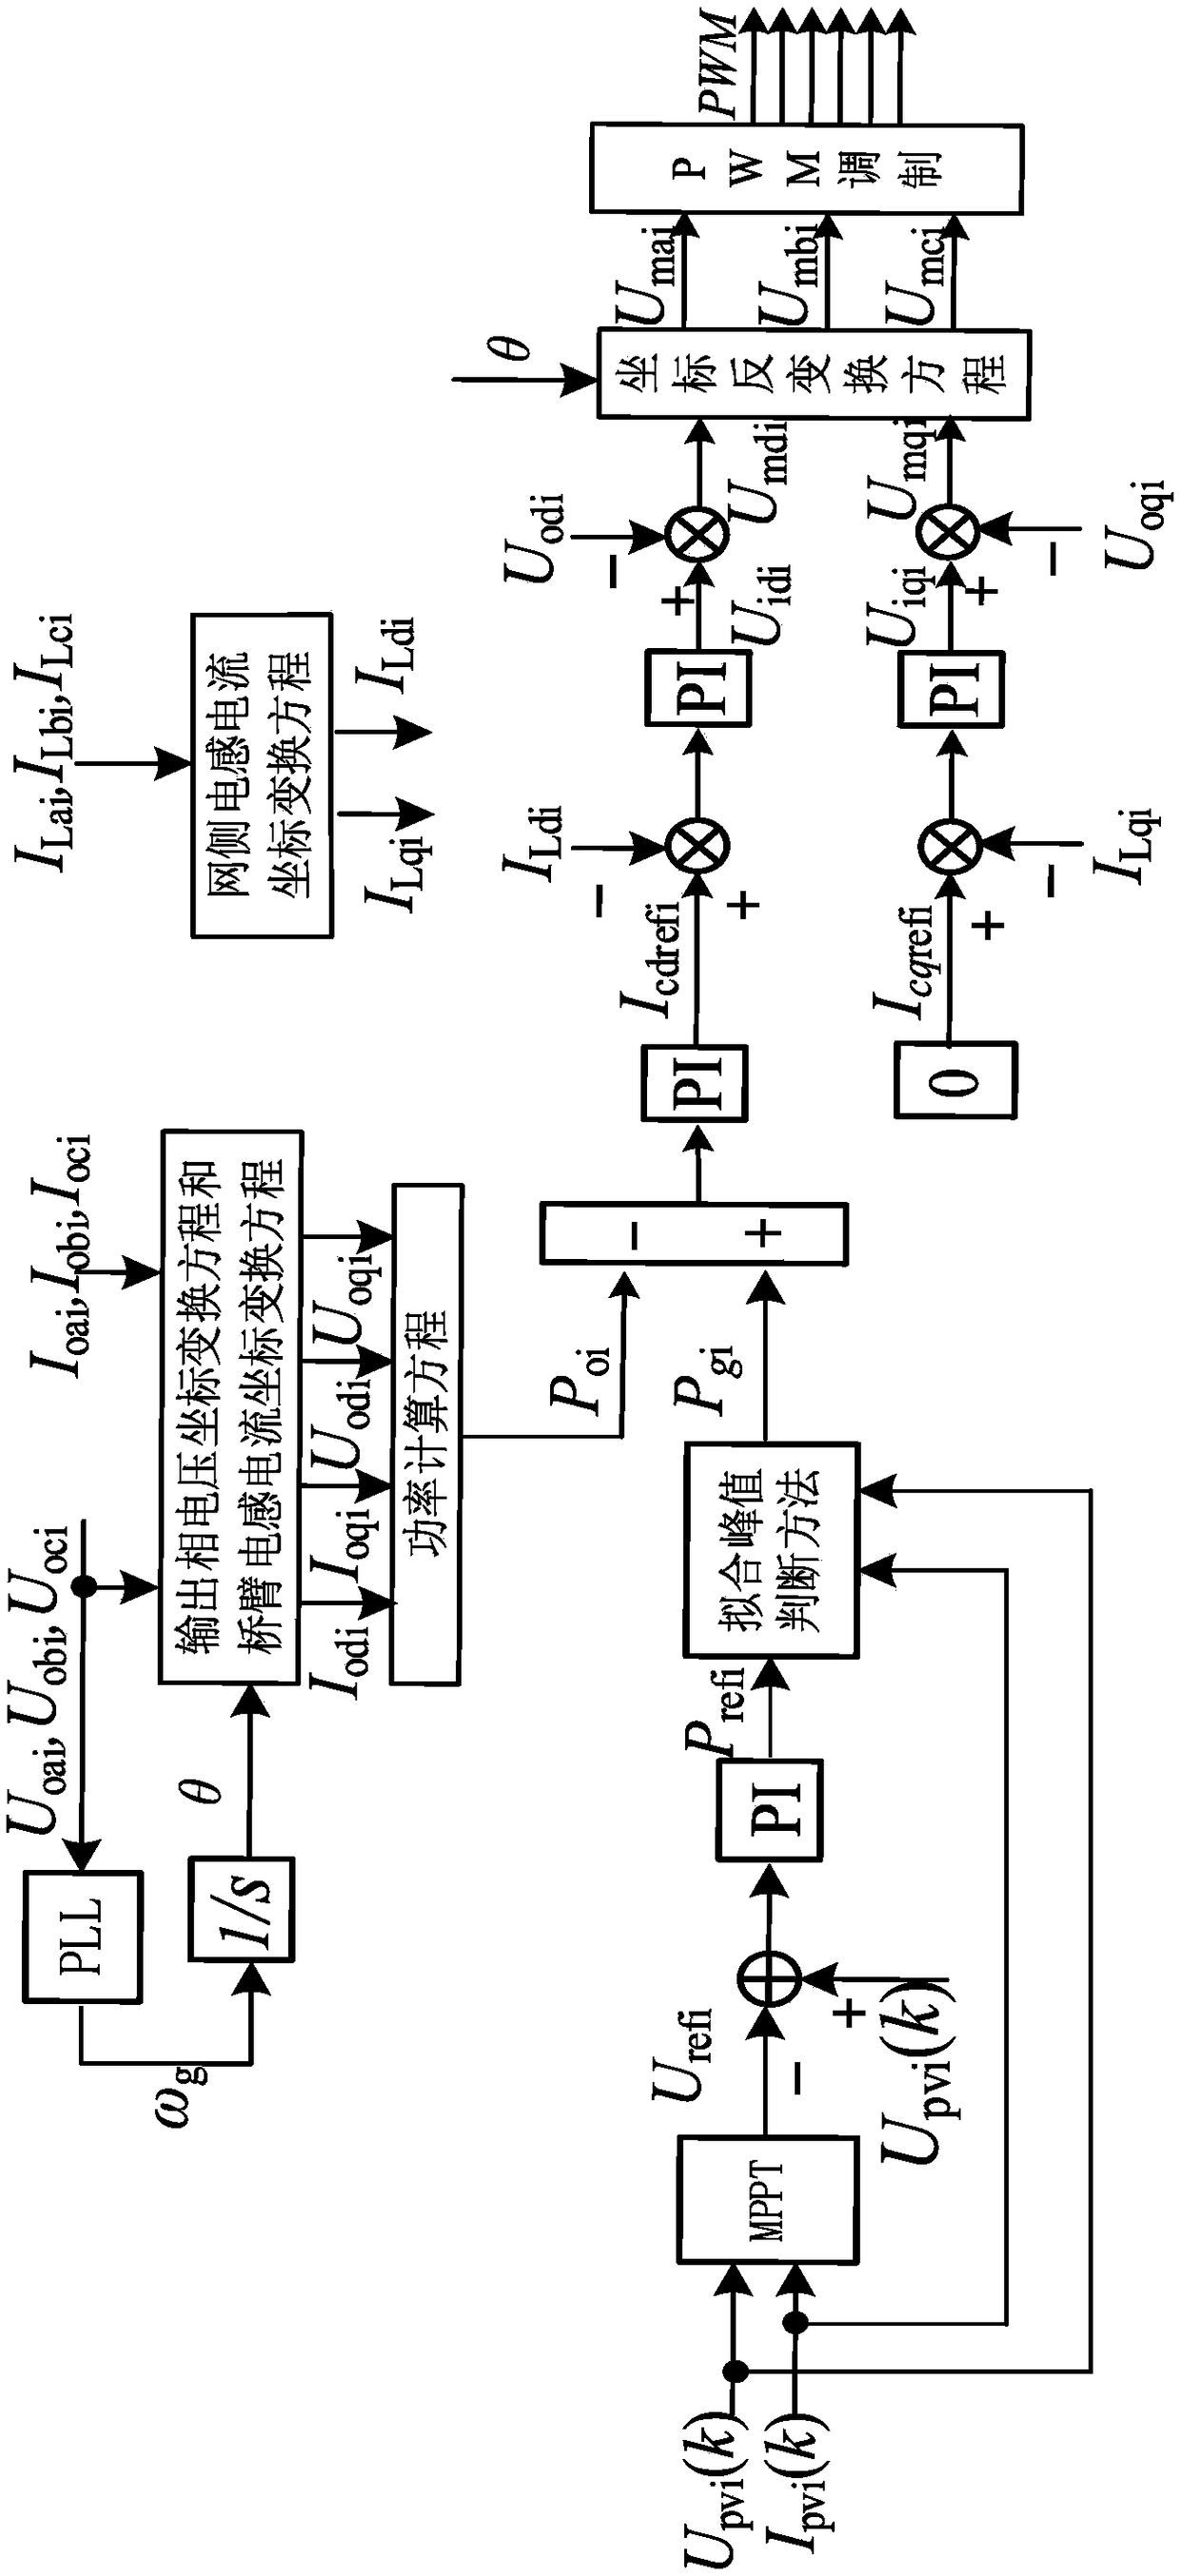 Photovoltaic grid connected inverter control method based on active power backup